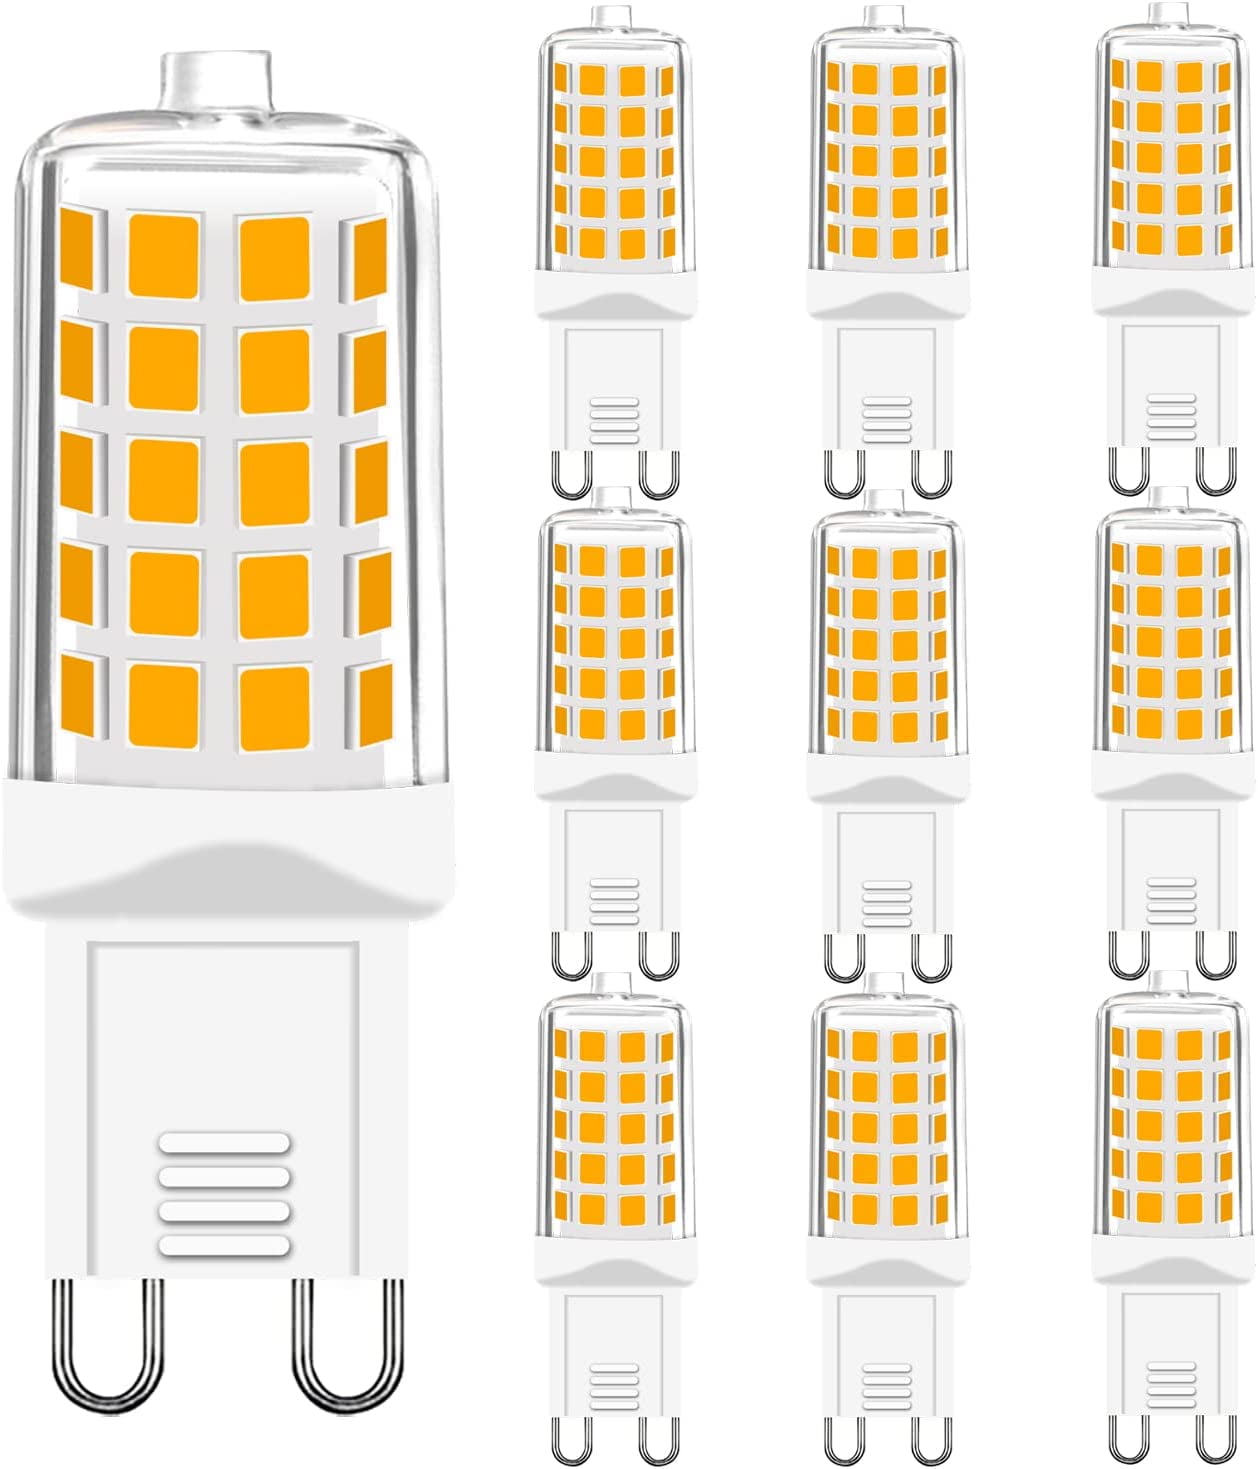 BAOMING Bulb 4W, W Equivalent Light Bulbs, 2700K Warm White Non-Dimmable, 10 Pack - Walmart.com